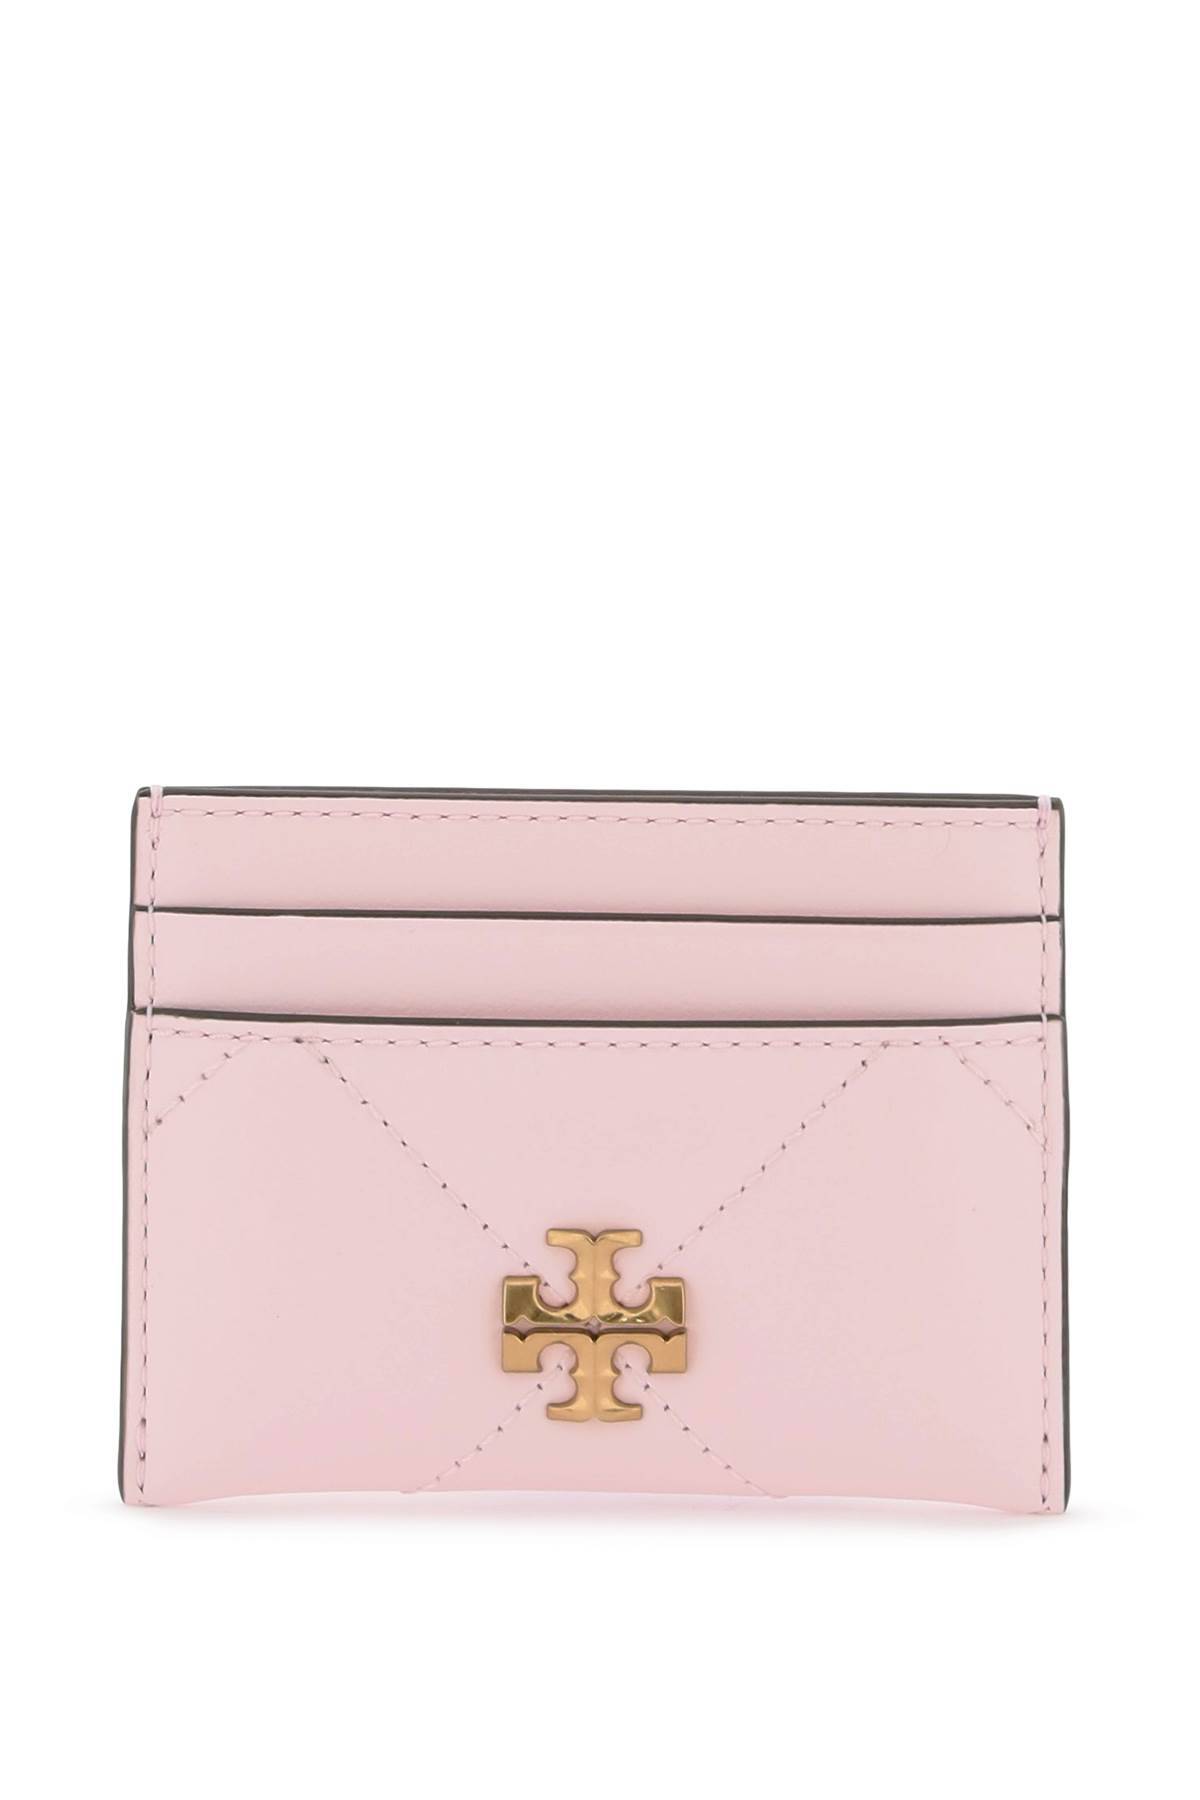 Tory Burch TORY BURCH kira card holder with trapezoid